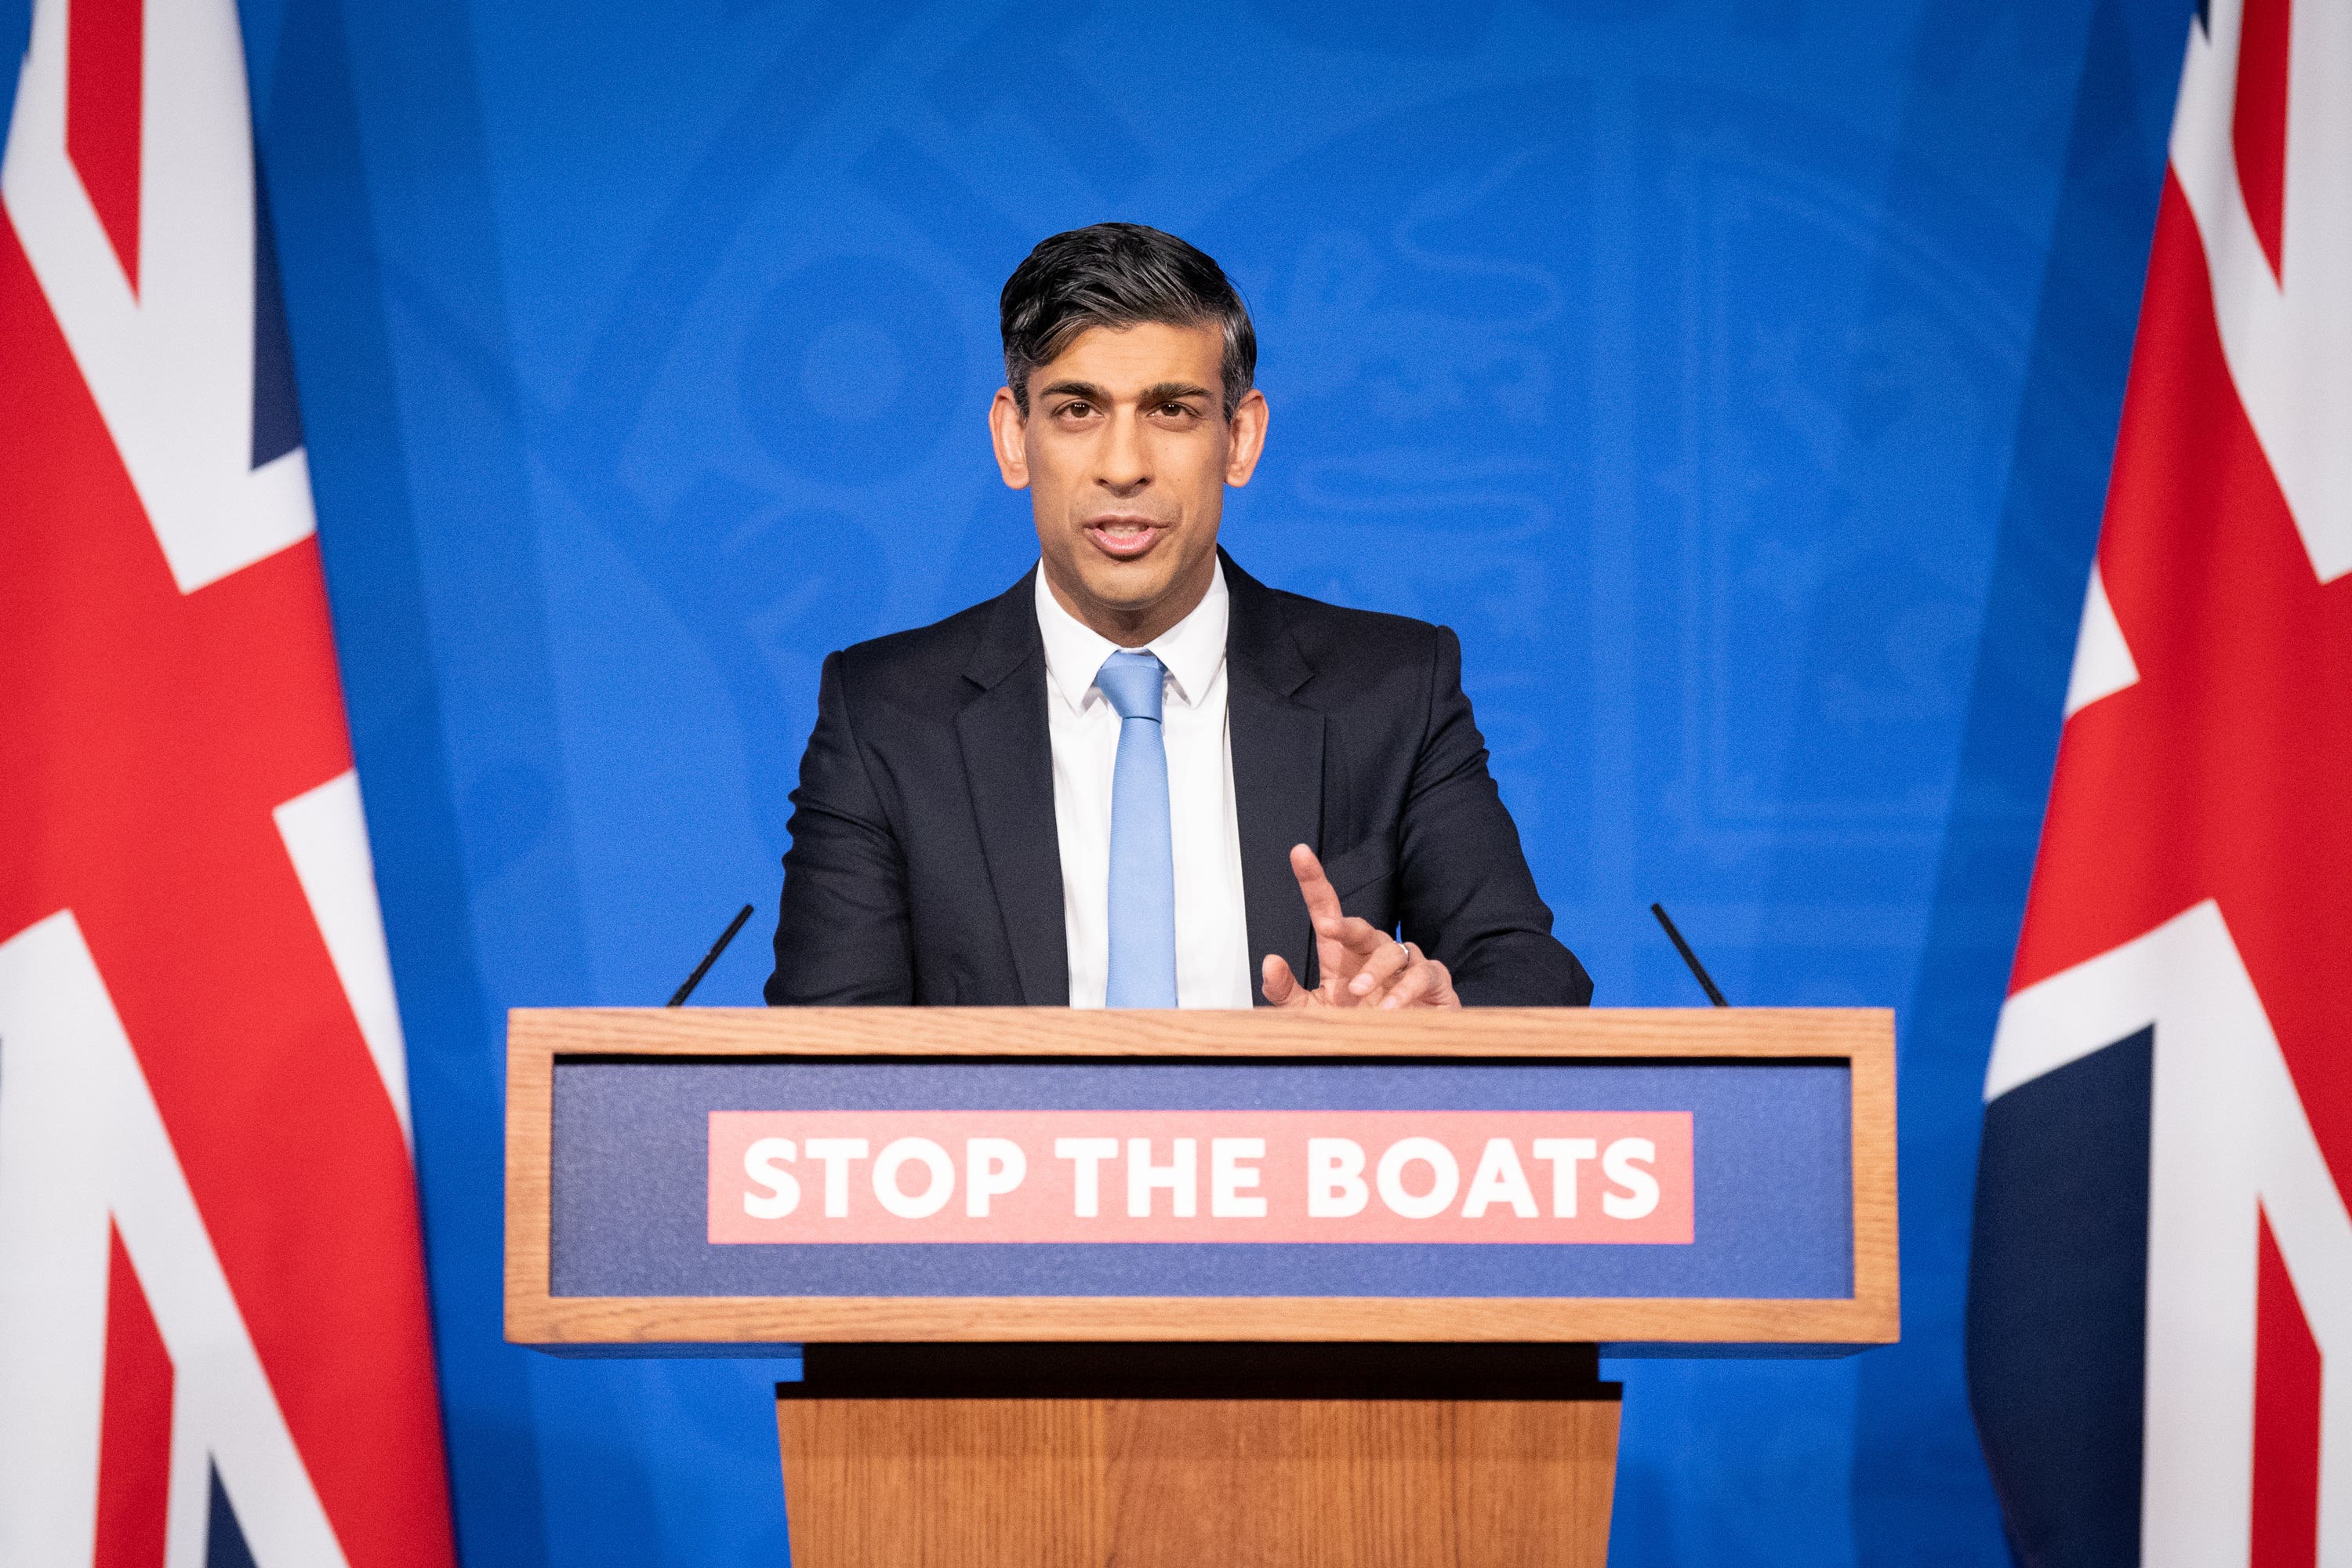 Rishi Sunak has made ‘stopping the boats’ one of the key pledges of his leadership